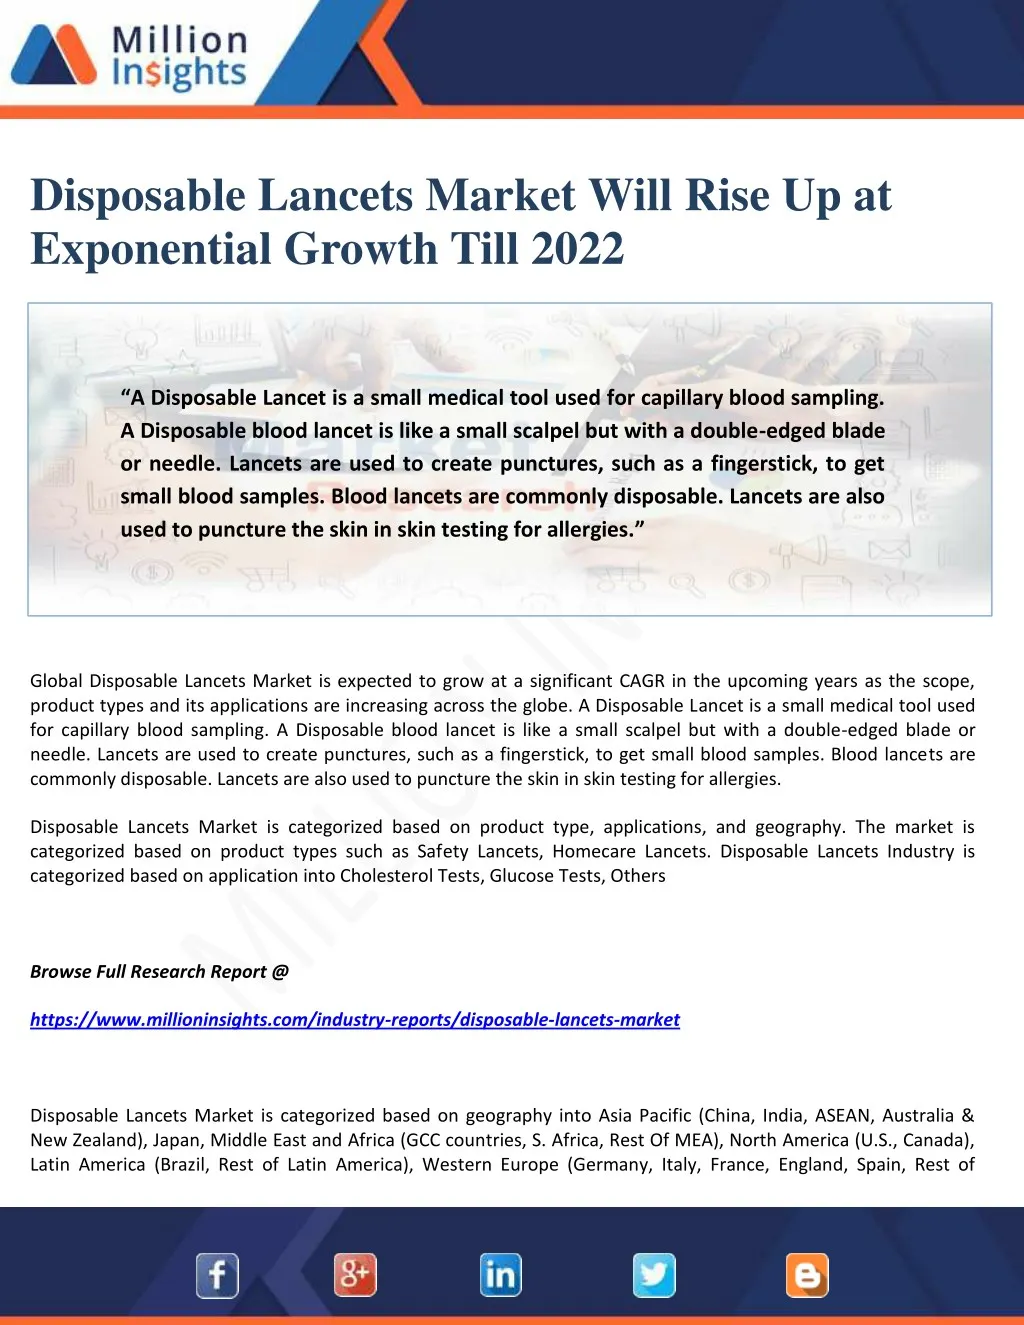 disposable lancets market will rise